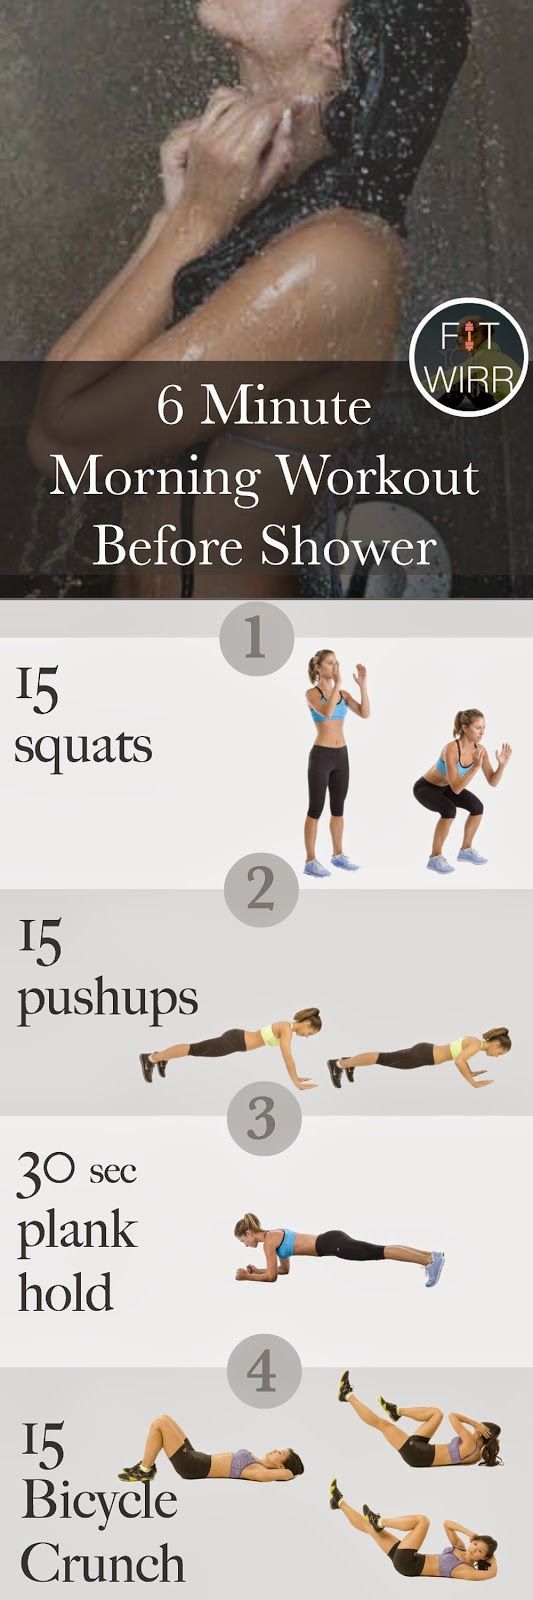 Свадьба - 6 Minute Morning Workout Before Shower